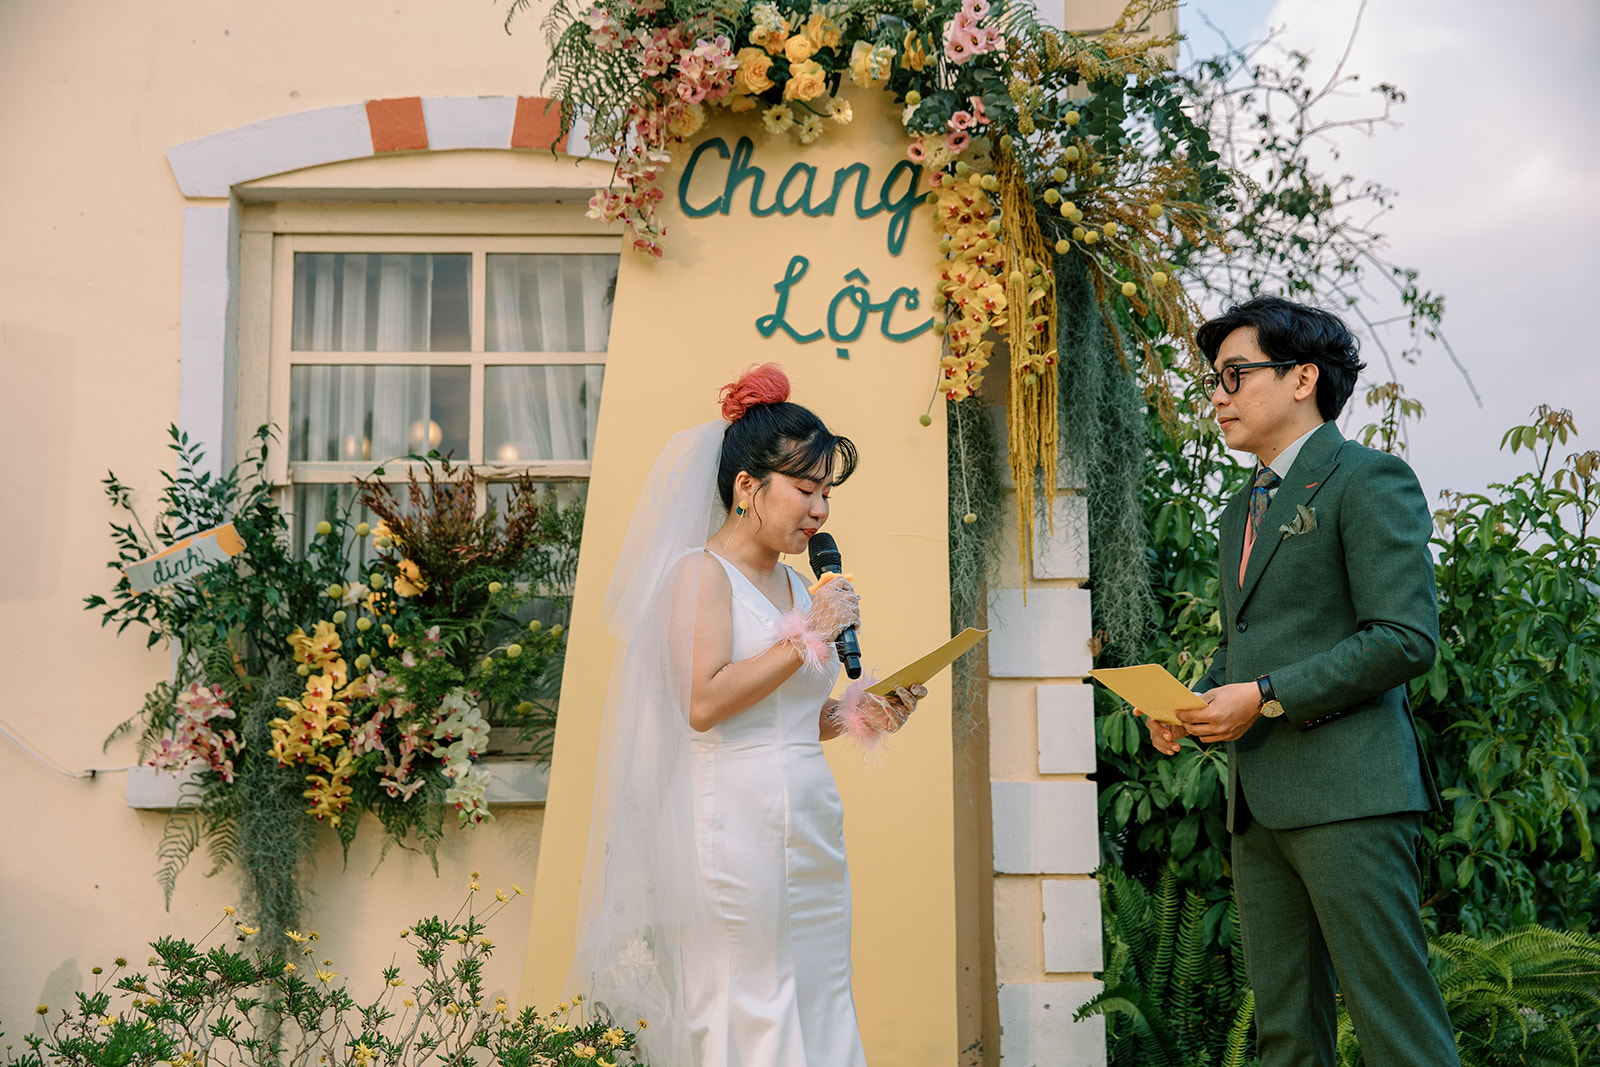 vow exchange in a micro intimate wedding in Dalat